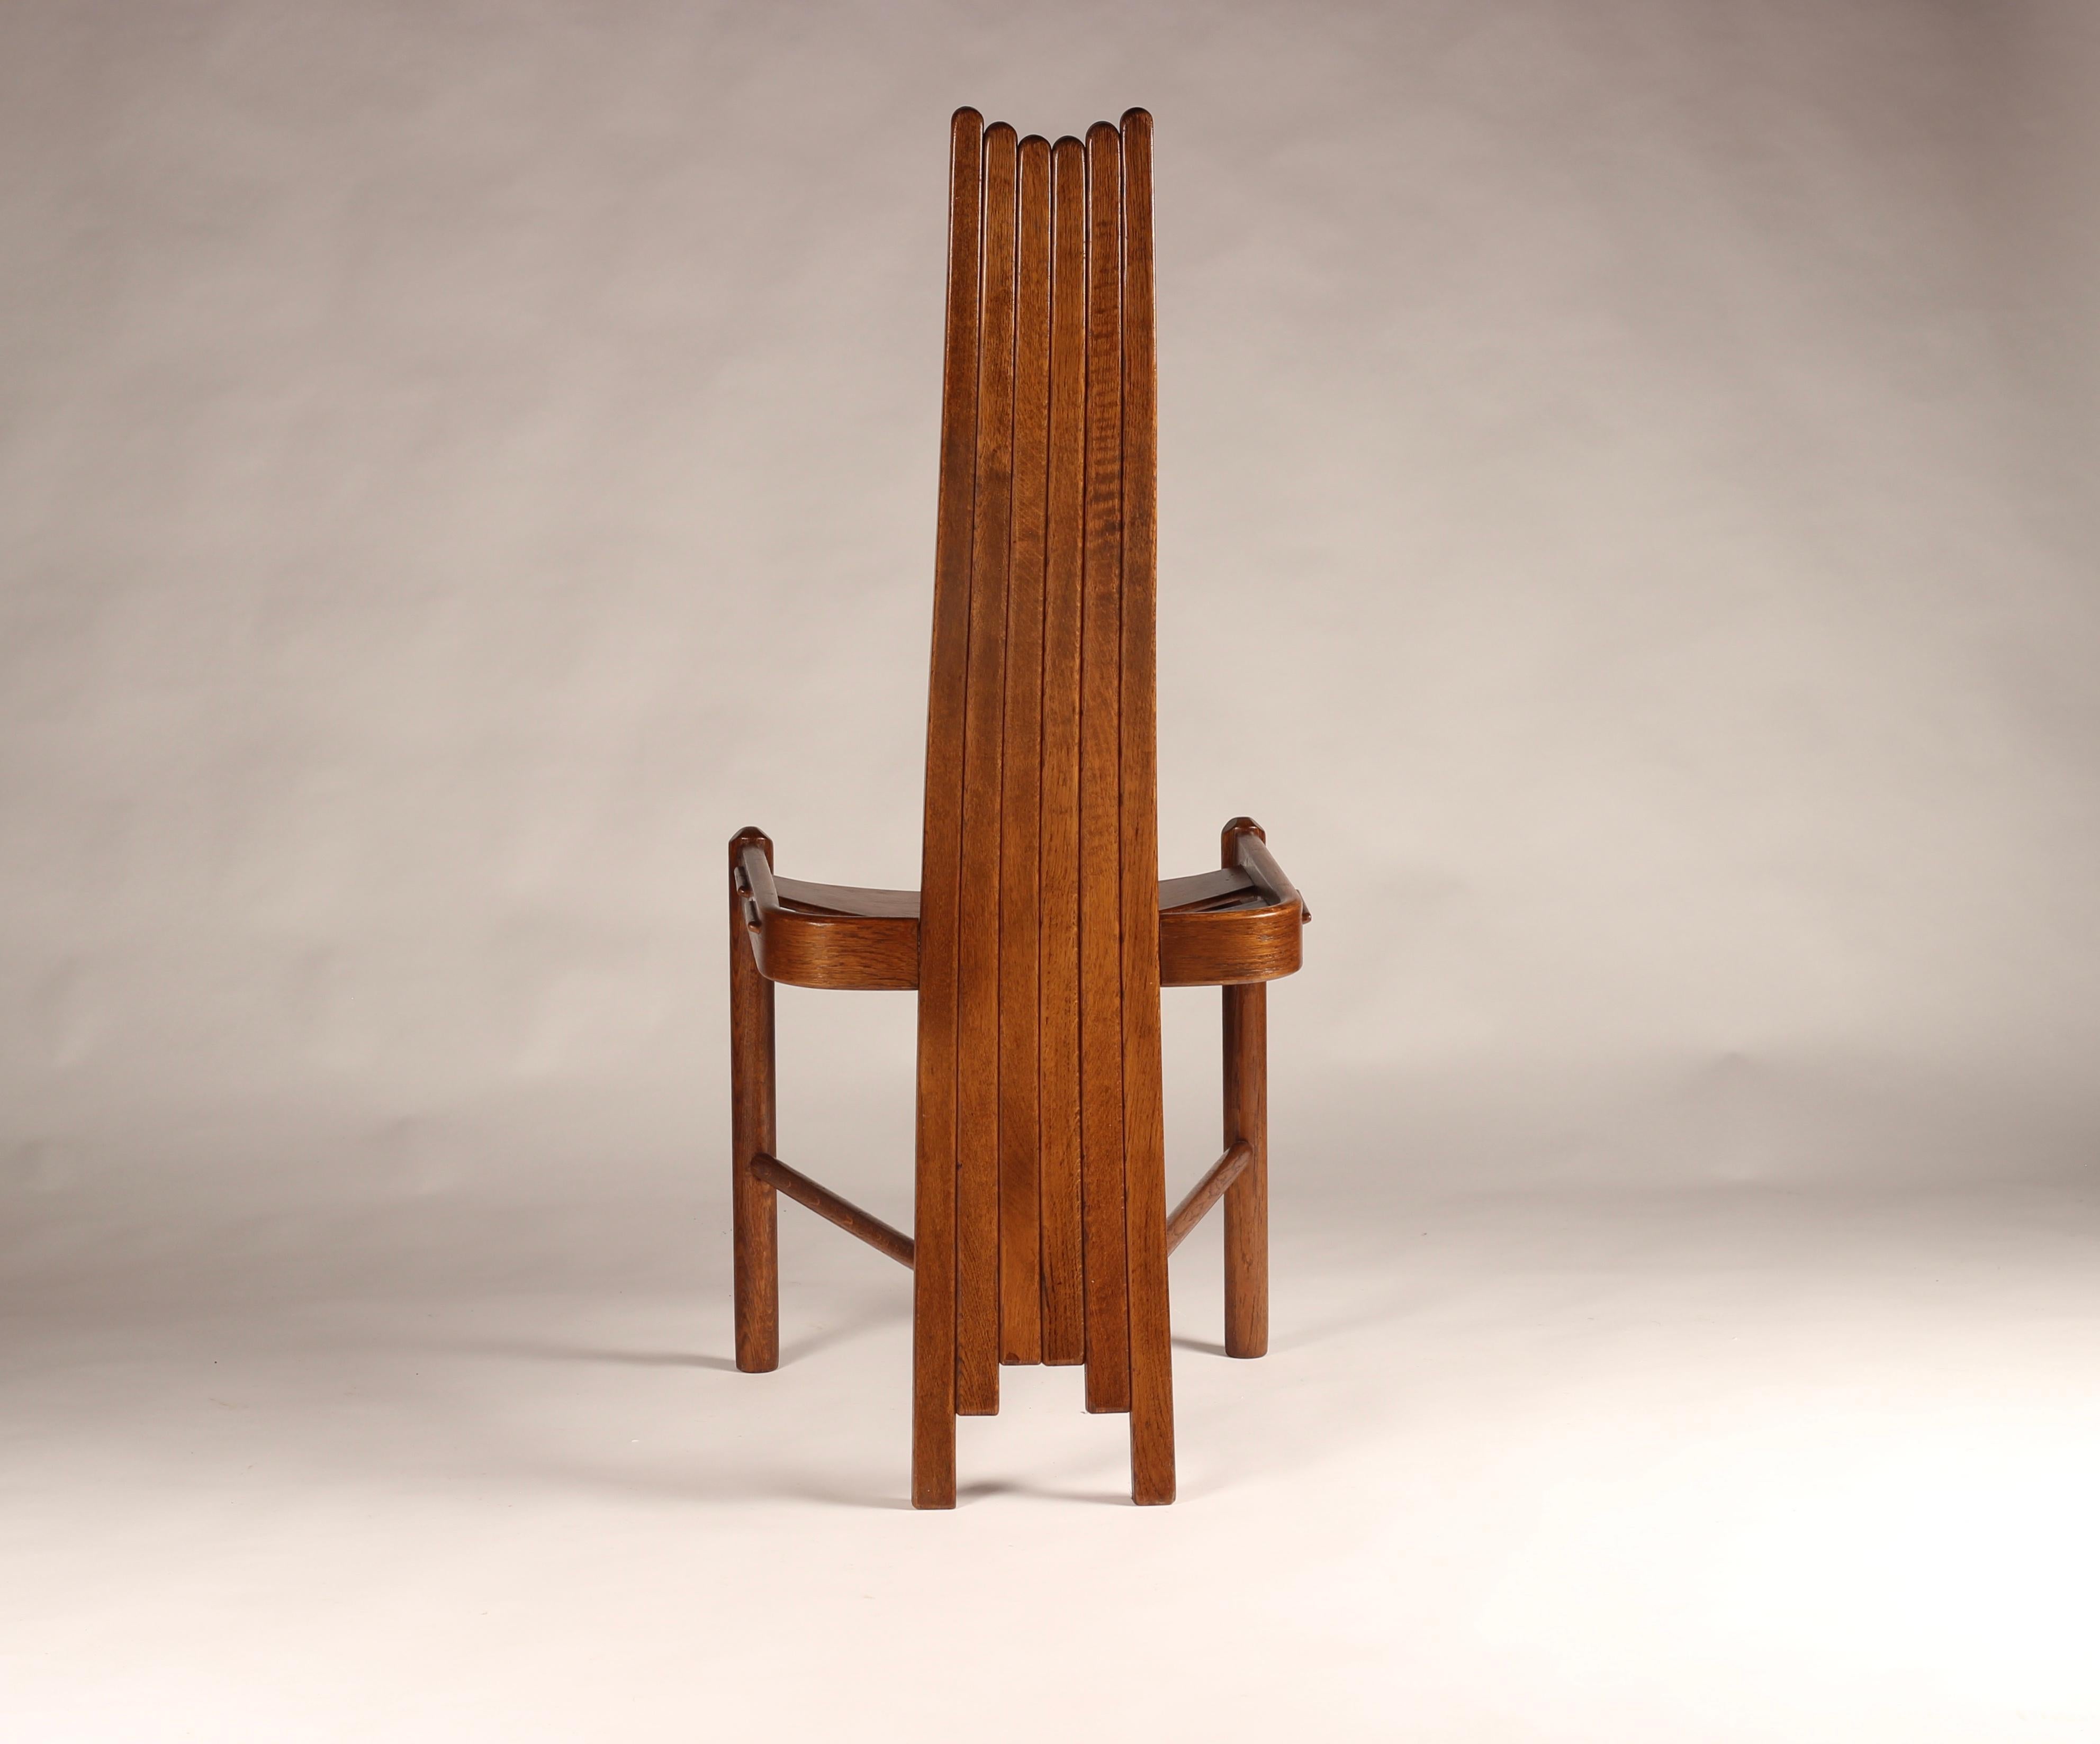 British Oak Steam Bent Dining Chairs in the Arts and Crafts/ Art Nouveau Style, 1900’s For Sale